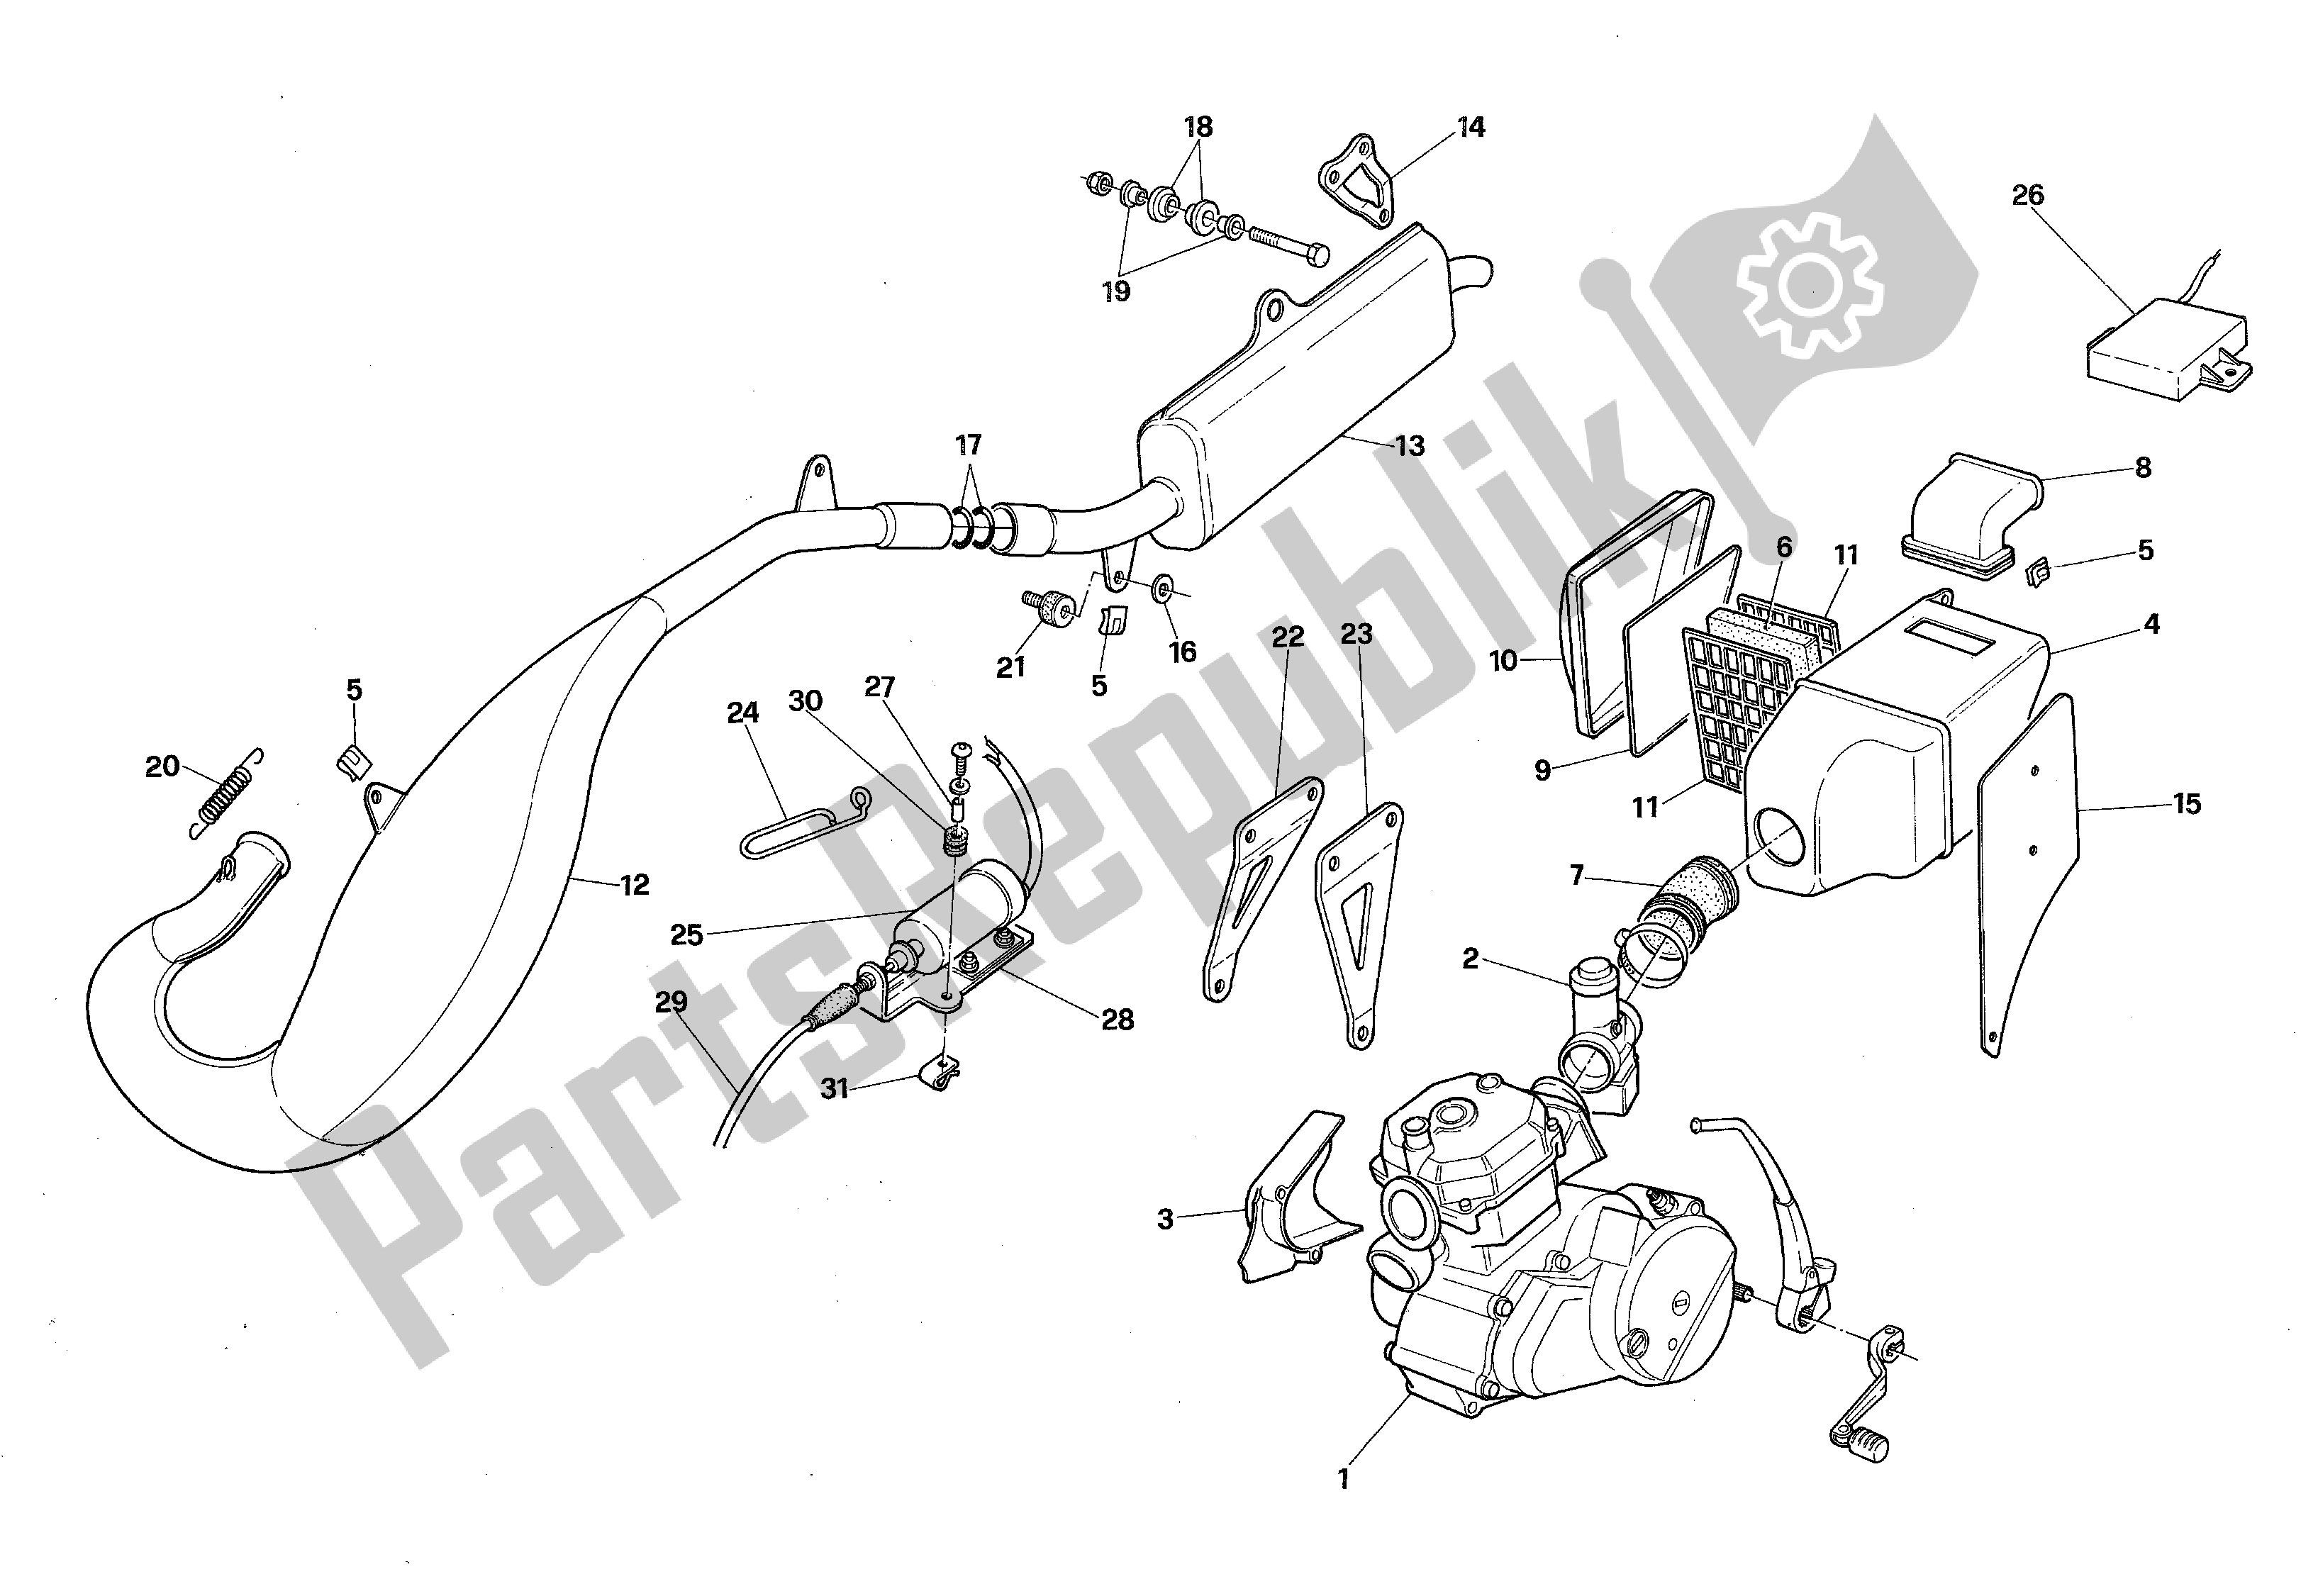 All parts for the Exhaust Assembly of the Aprilia RX 125 1989